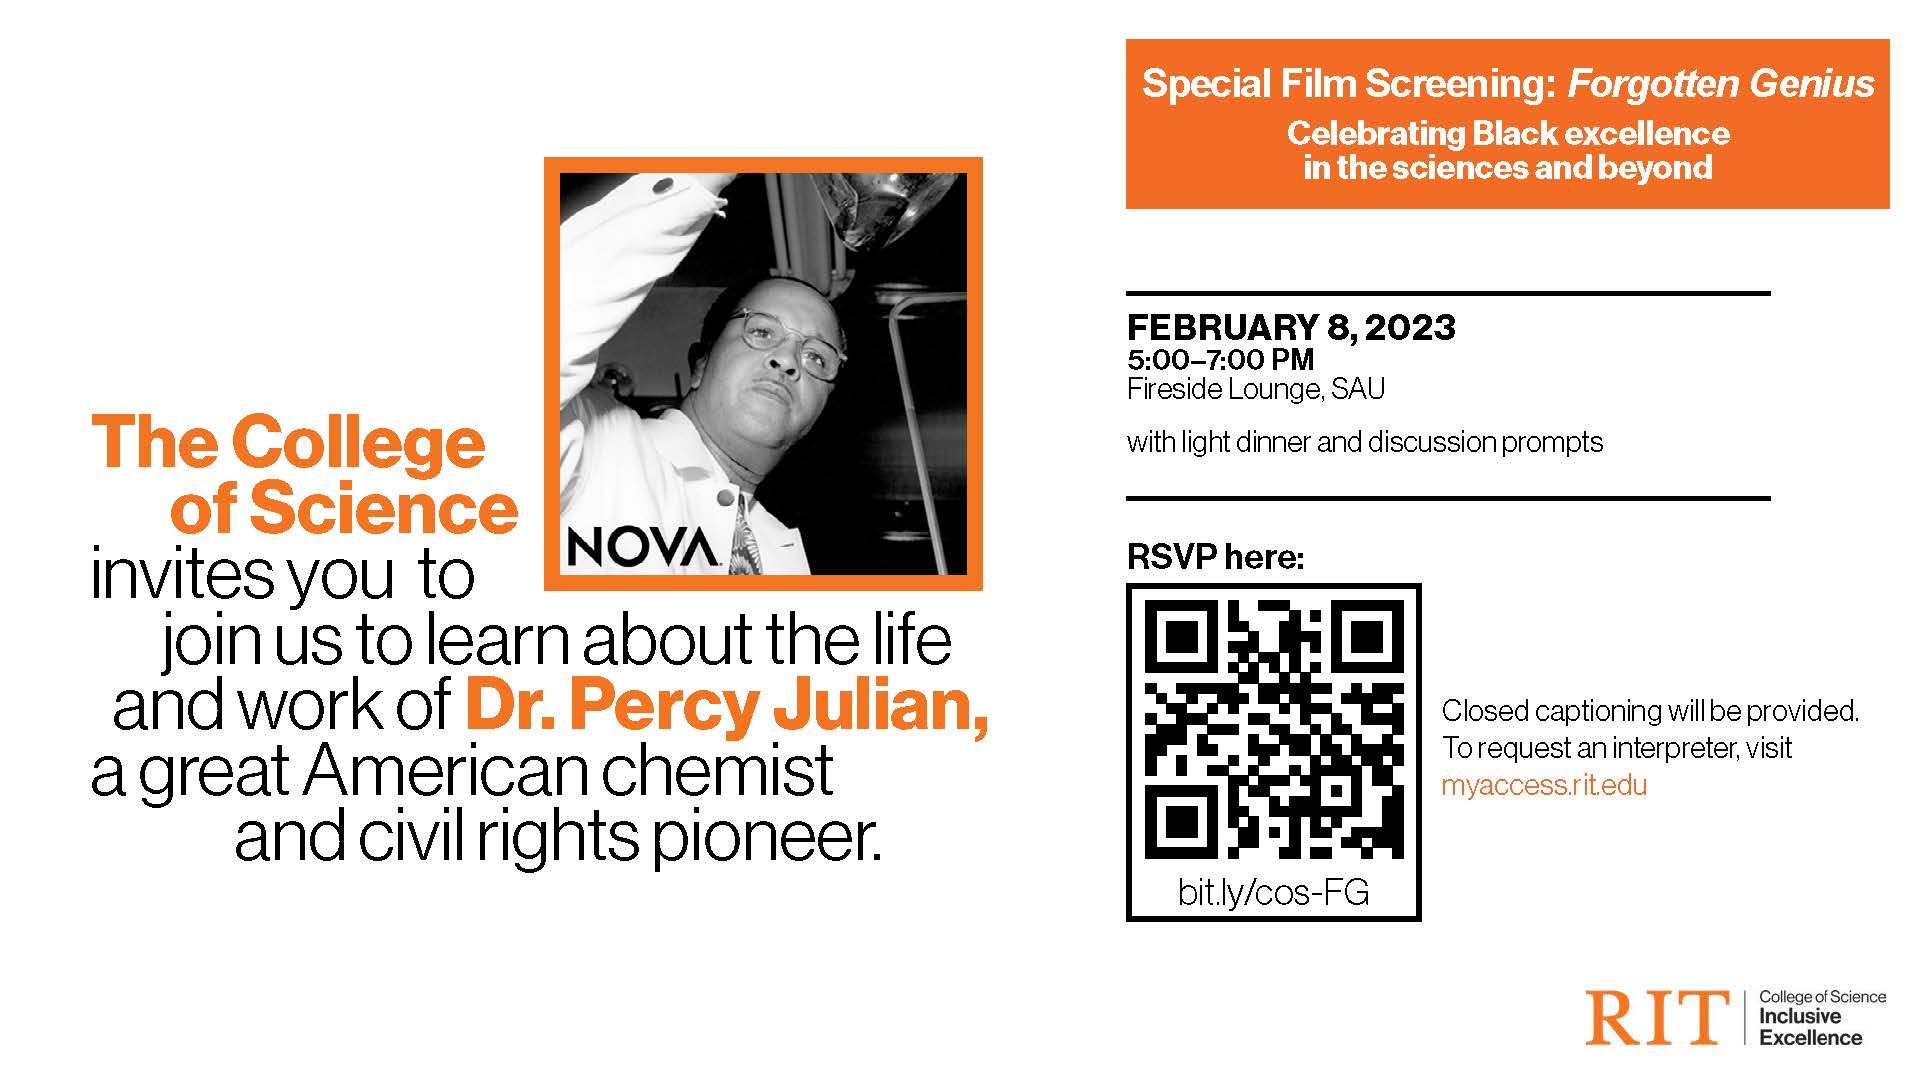 The College of Science invites you to join us to learn about the life and work of Dr. Percy Julian, a great American chemist and civil rights pioneer. FEBRUARY 8, 2023 5:00–7:00 PM Fireside Lounge, SAU with light dinner and discussion prompts RSVP at https://bit.ly/cos-FG Closed captioning will be provided. To request an interpreter, visit myaccess.rit.edu. Dr. Percy Julian was a man of genius, devotion, and determination. 